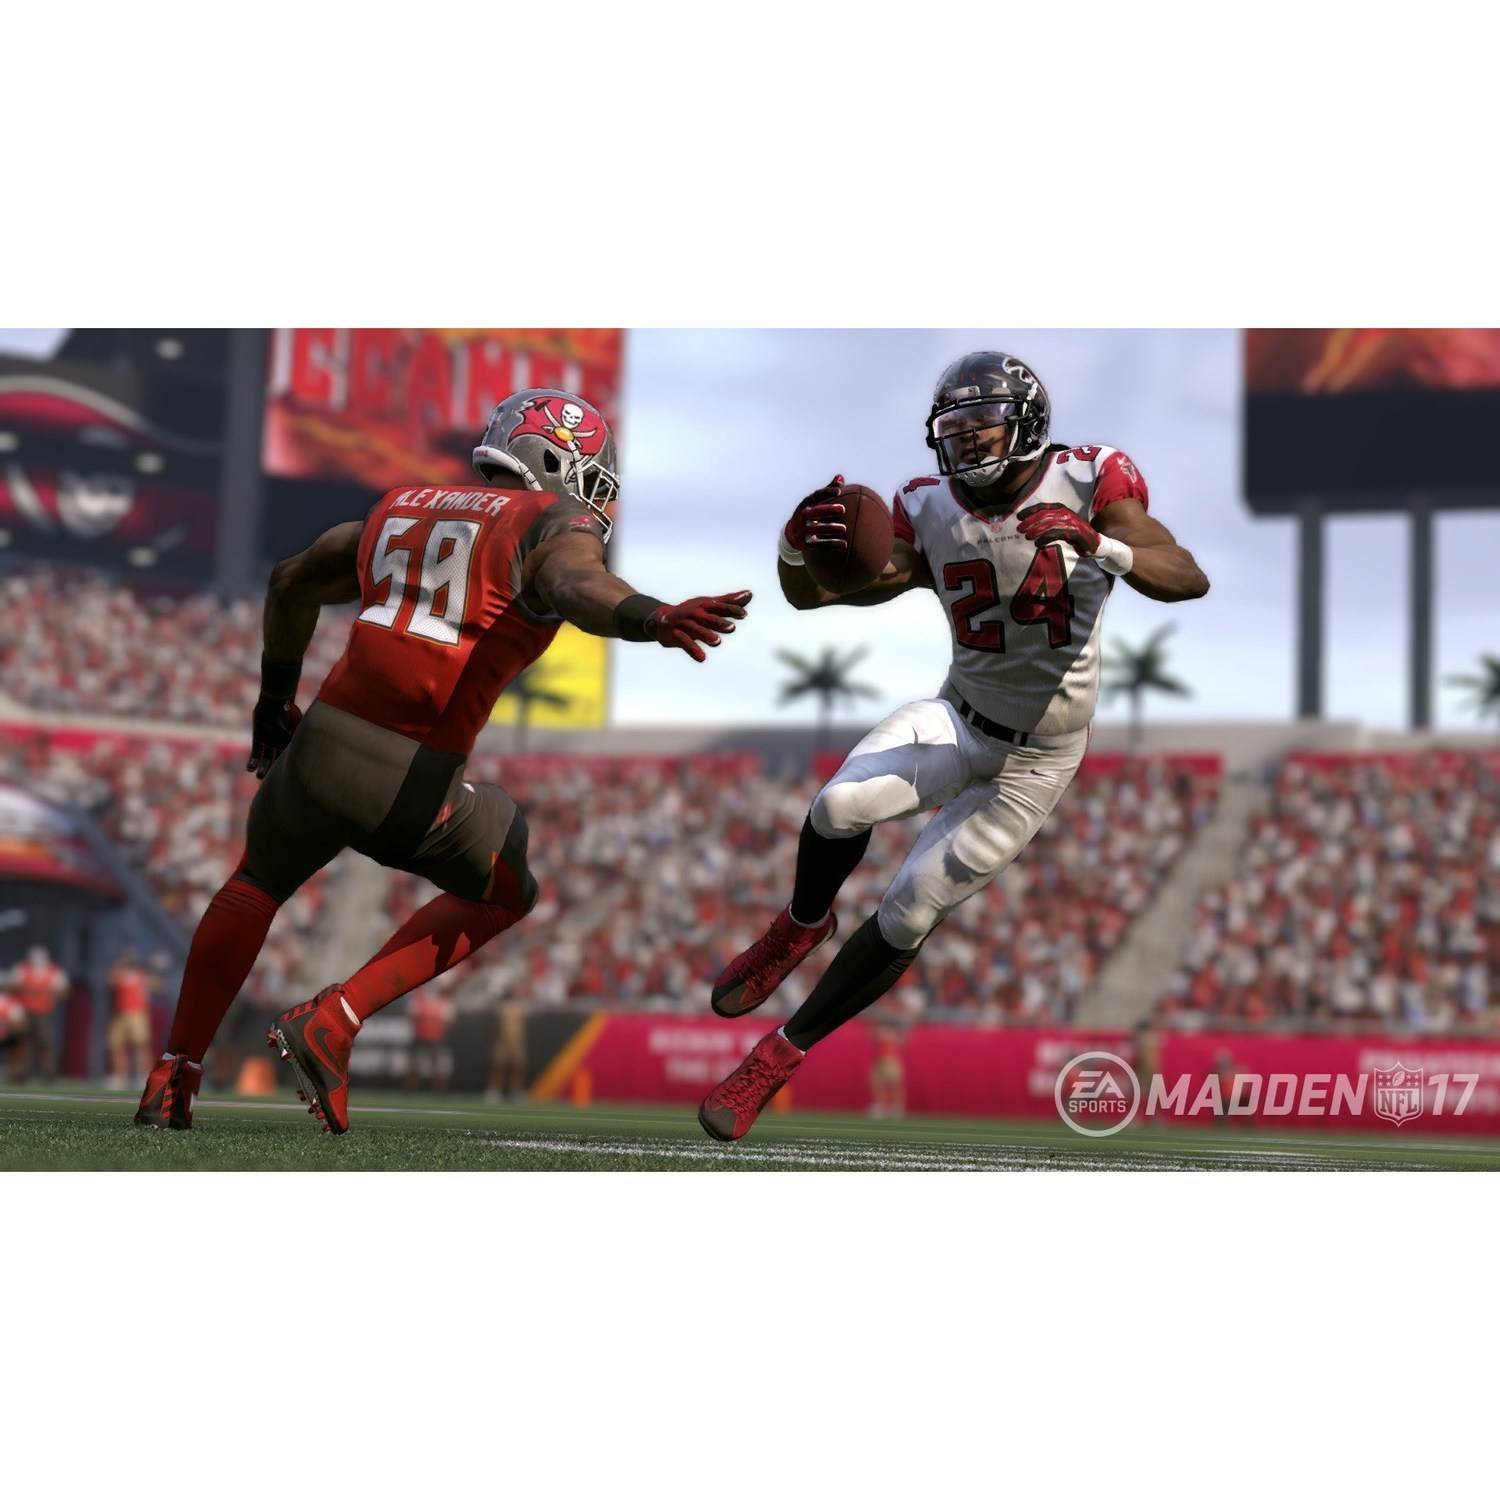 Madden NFL 17, Electronic Arts, PlayStation 4, 014633368574 - image 3 of 12